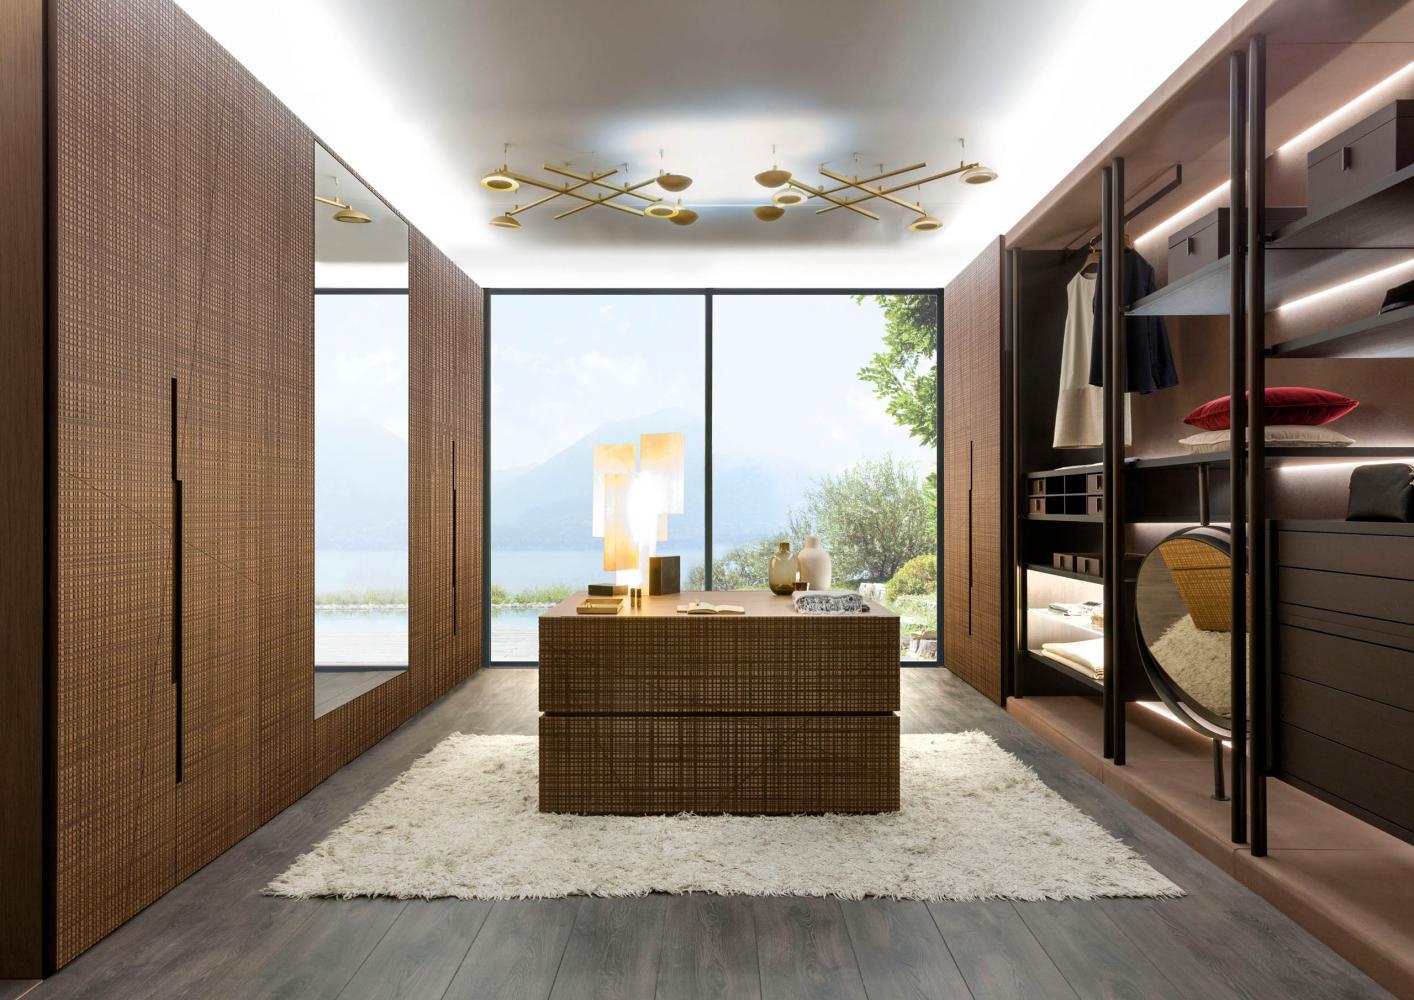 Laurameroni luxury modern made to measure day and night wardrobes or walk in closets for contemporary bedroom or living room interior decor and design